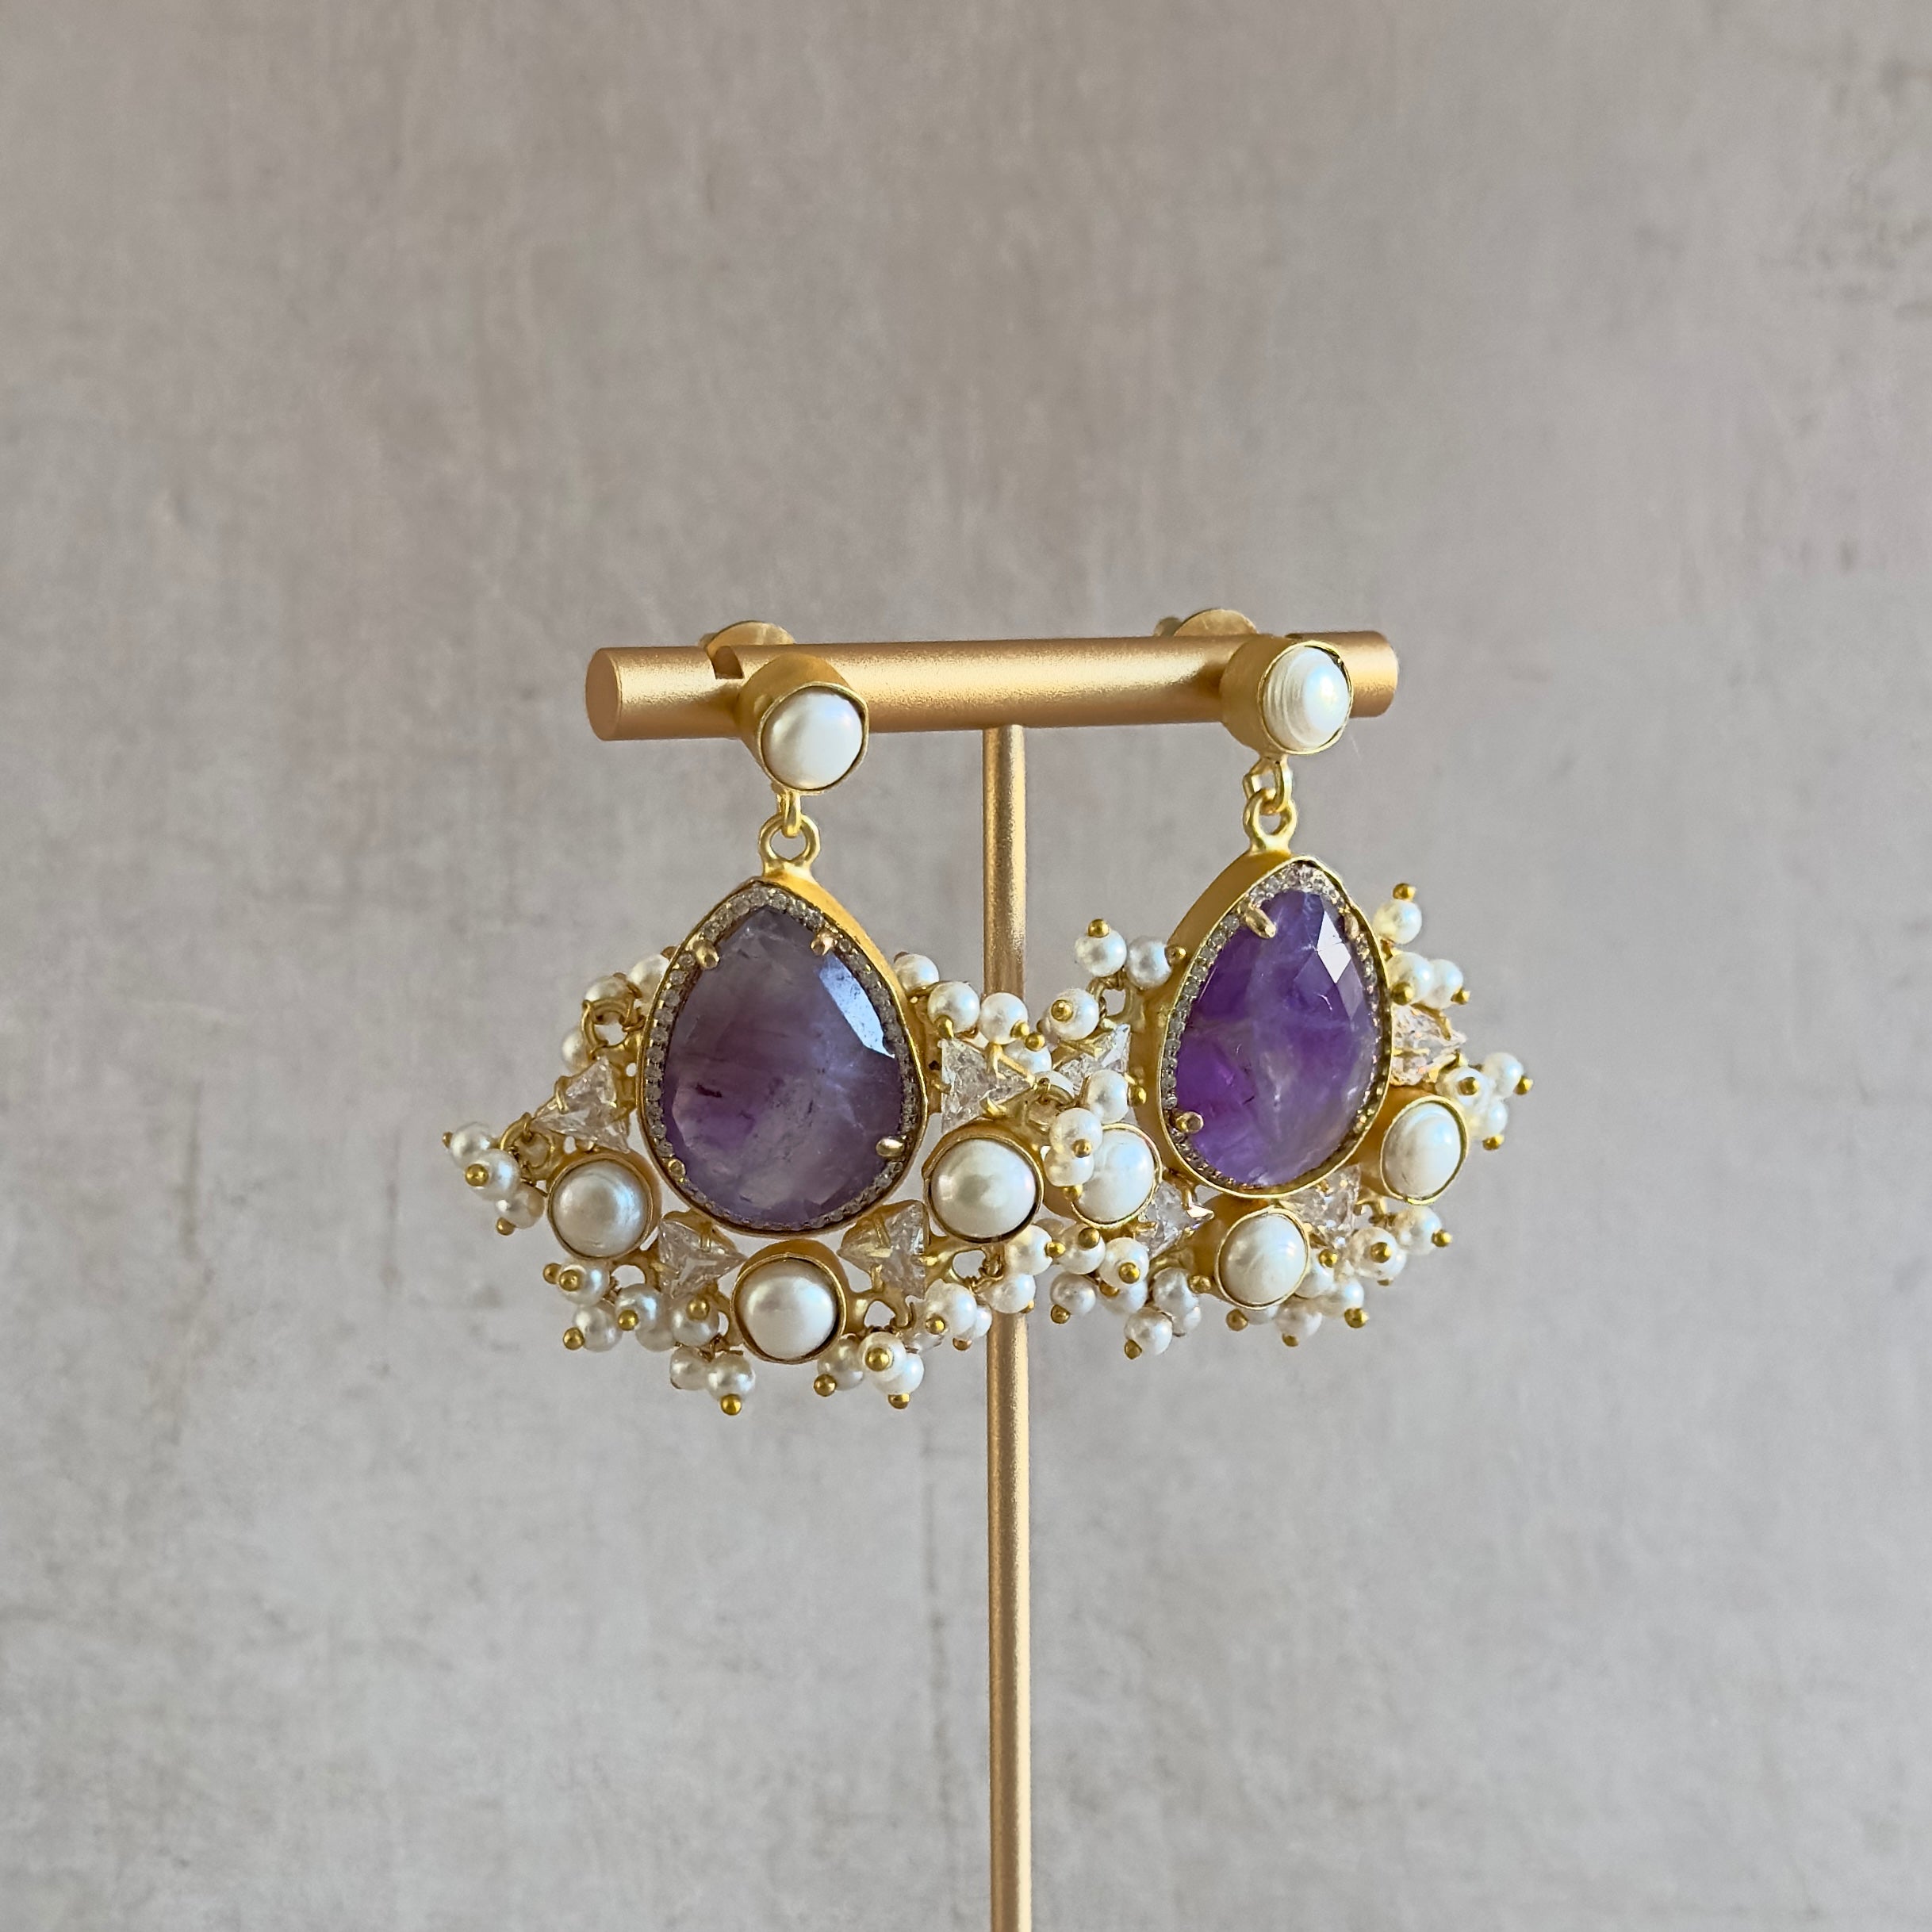 Introducing the Poppy Purple Drop Earrings - the perfect combination of elegant amethyst stone, delicate pearl accents, and shining cz crystals! Experience the beauty of nature with these stunning earrings that will add a touch of sophistication and grace to any outfit.